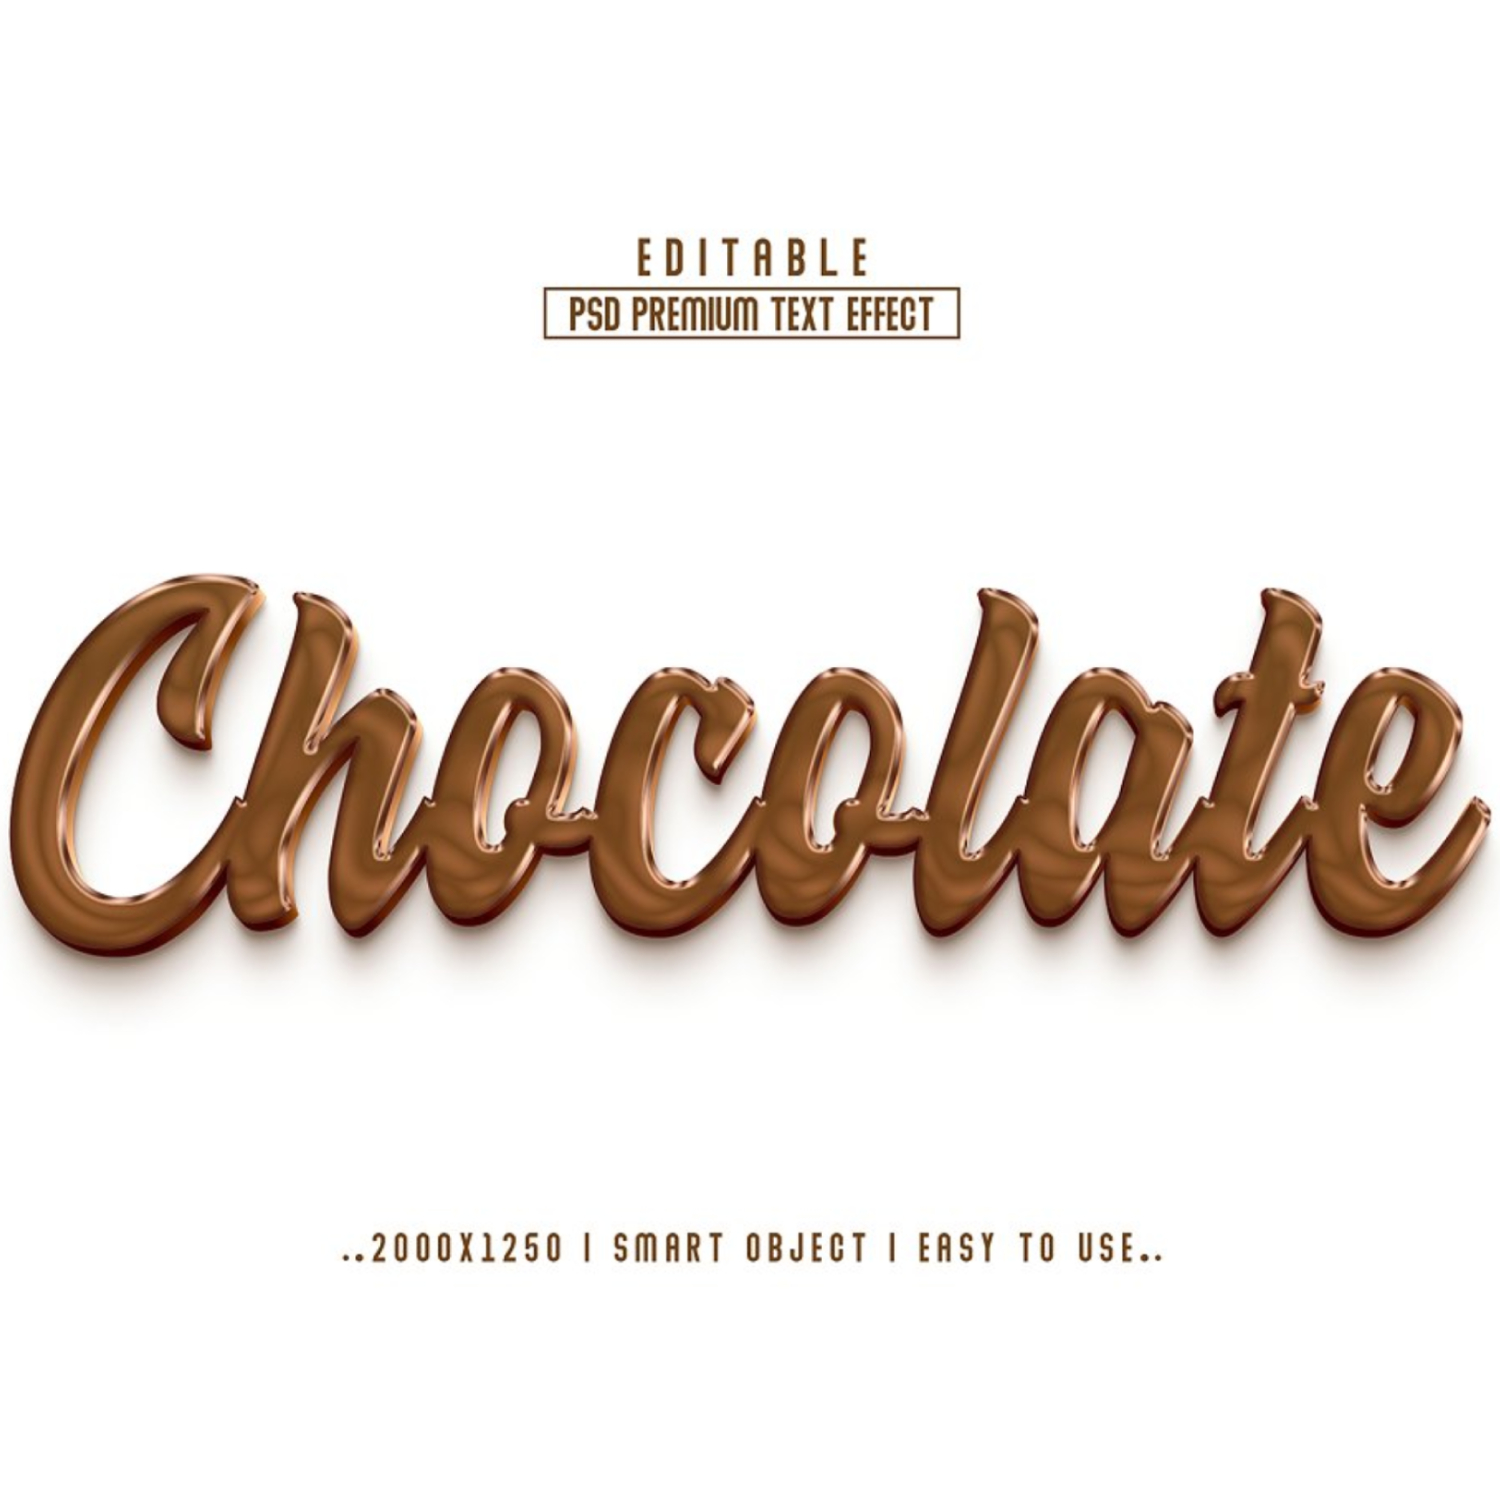 Chocolate text effect.